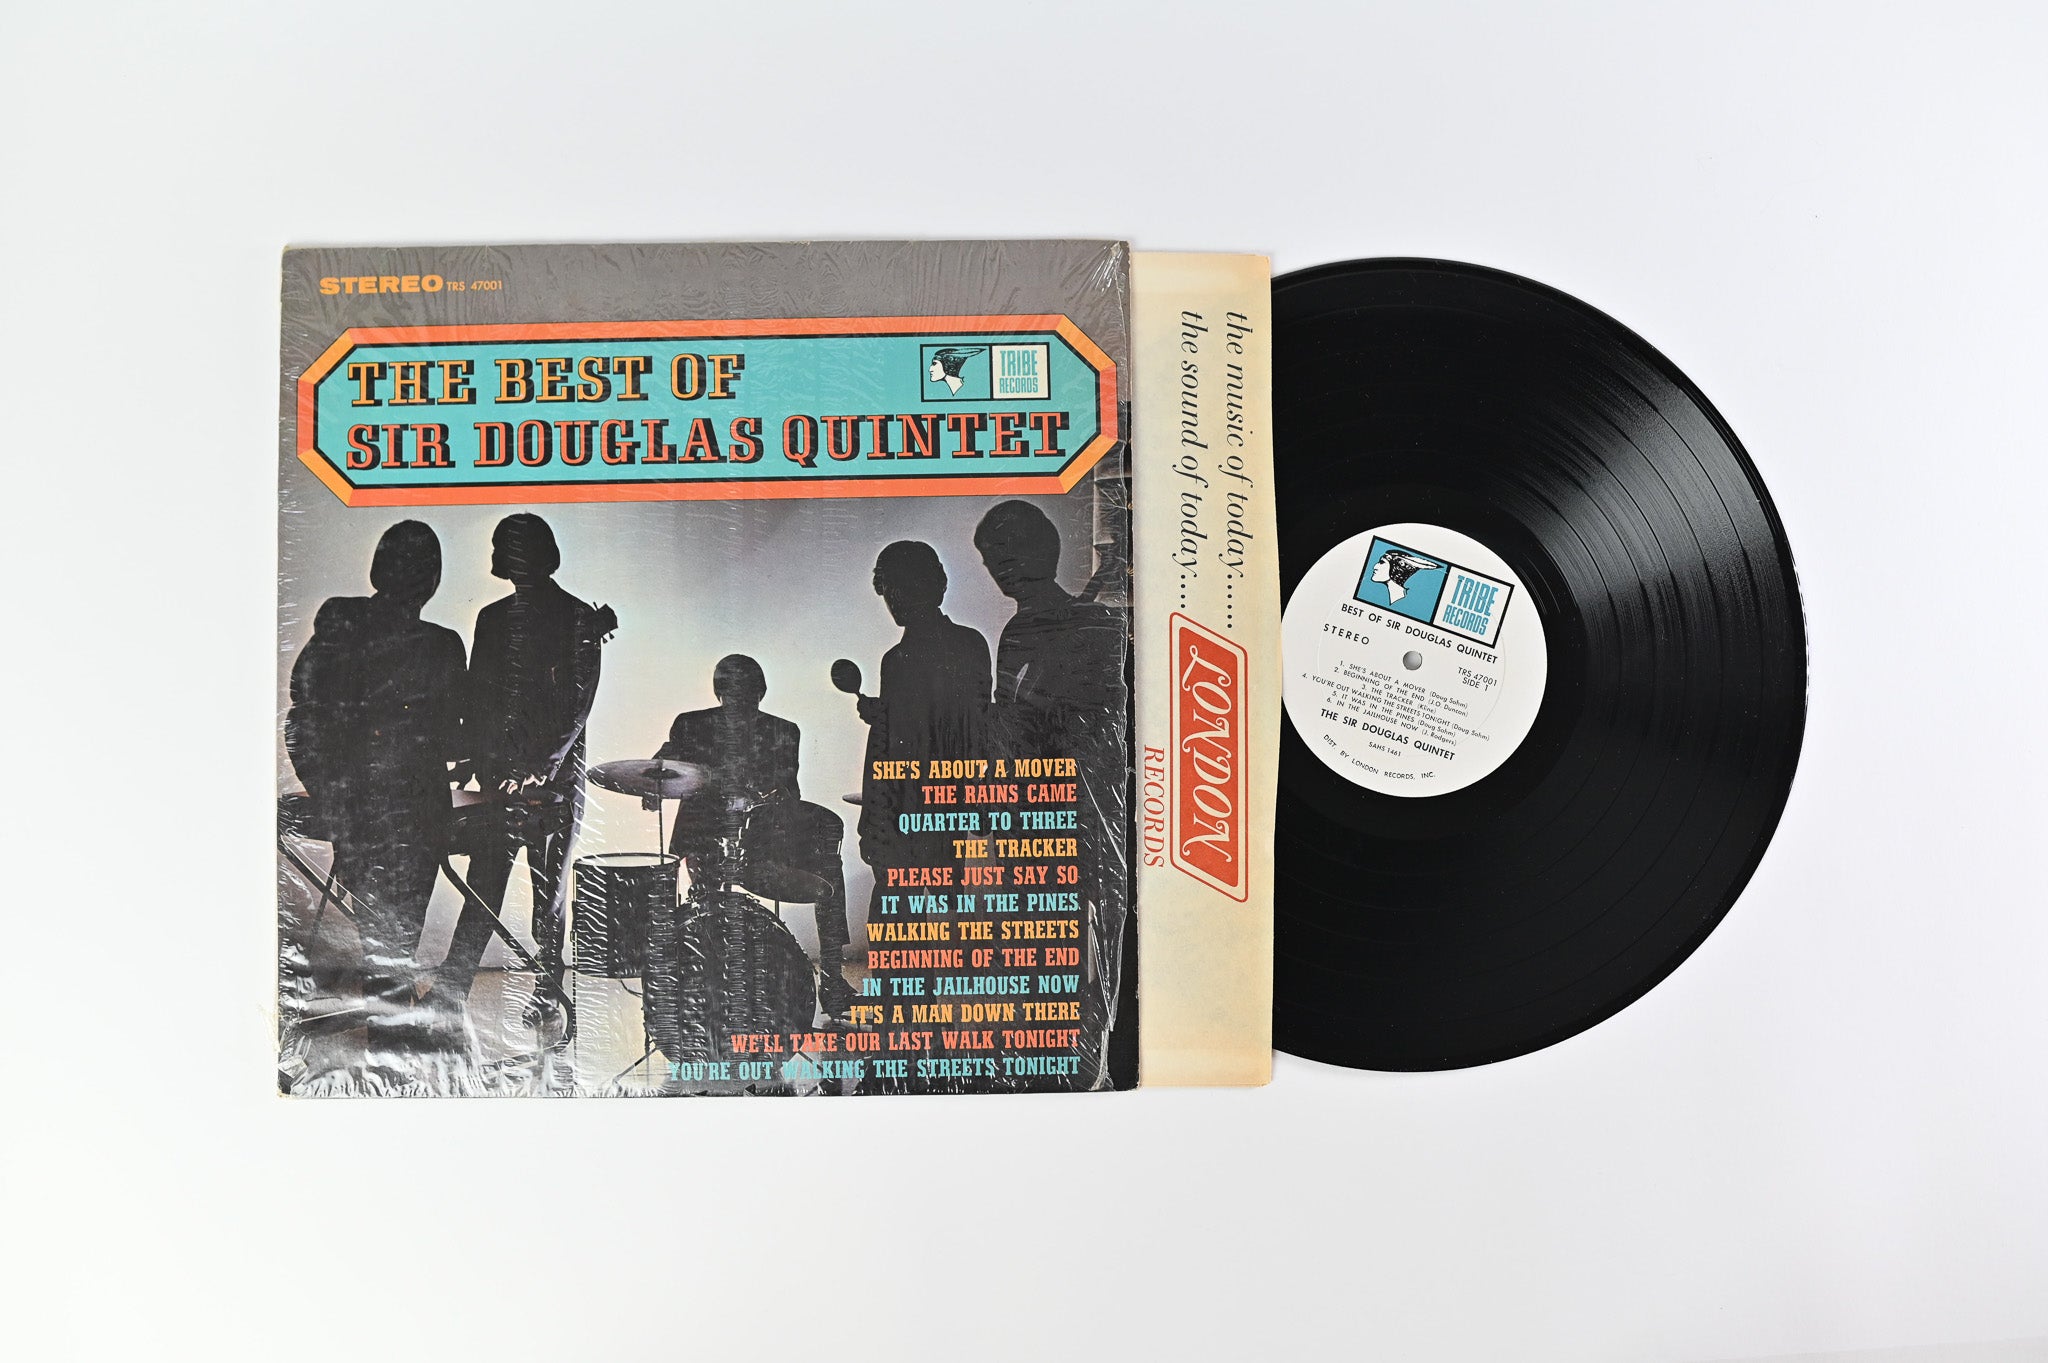 Sir Douglas Quintet - The Best Of Sir Douglas Quintet on Tribe Records w/White Labels